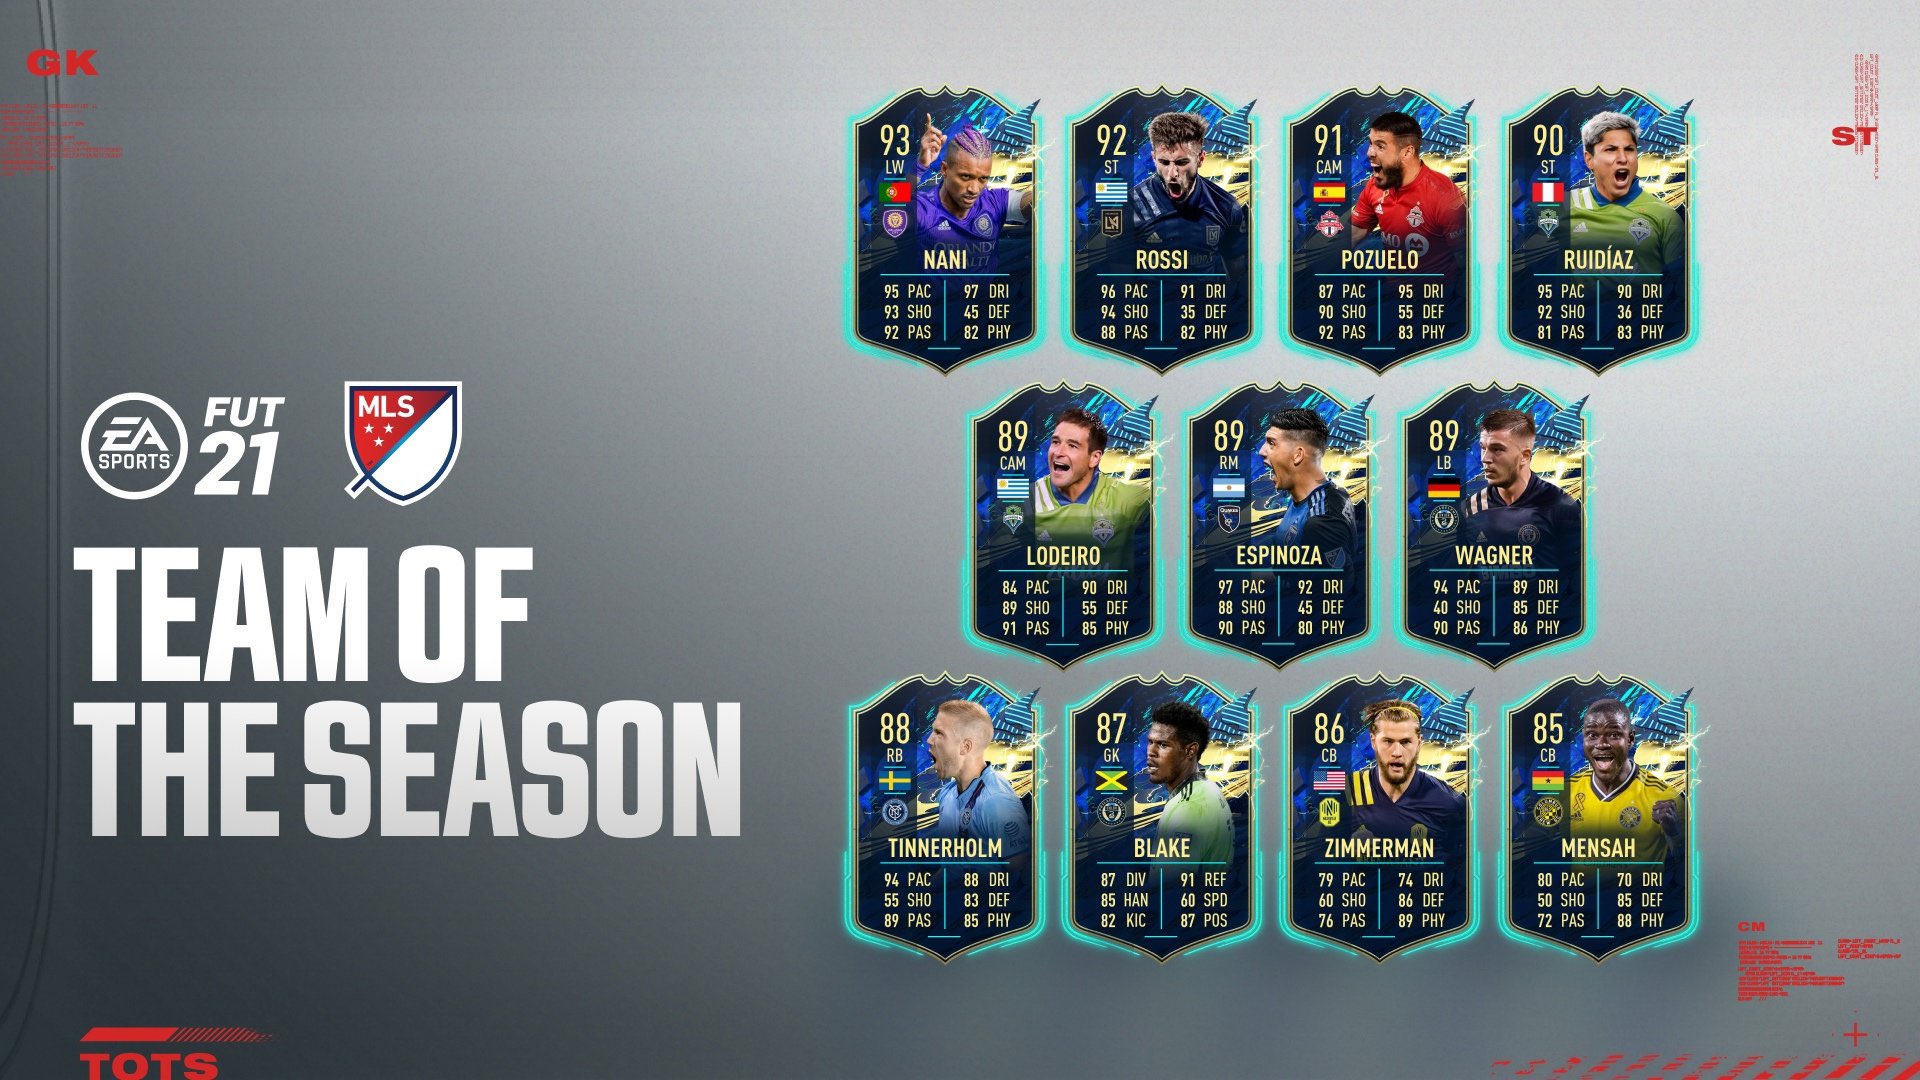 Patric on Twitter: "MLS &amp; ROW #TOTS 9/11 MLS ✓ 8/11 ROW ✓ Some upgrades  are a bit underwhelming to be honest, especially for players like Onuachu,  Zimmermann and Lodeiro but that